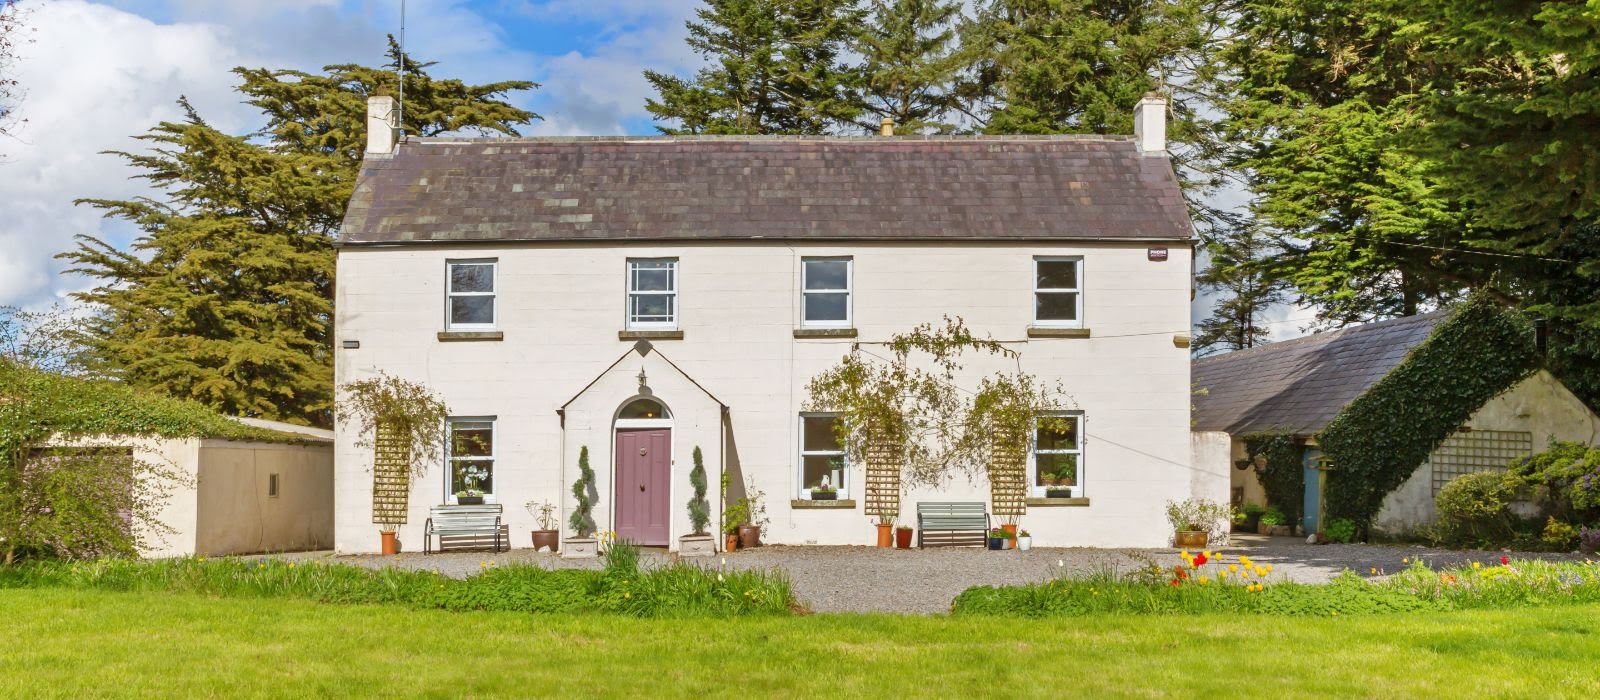 Tornant House: This extraordinary Wicklow home is on the market for €950,000